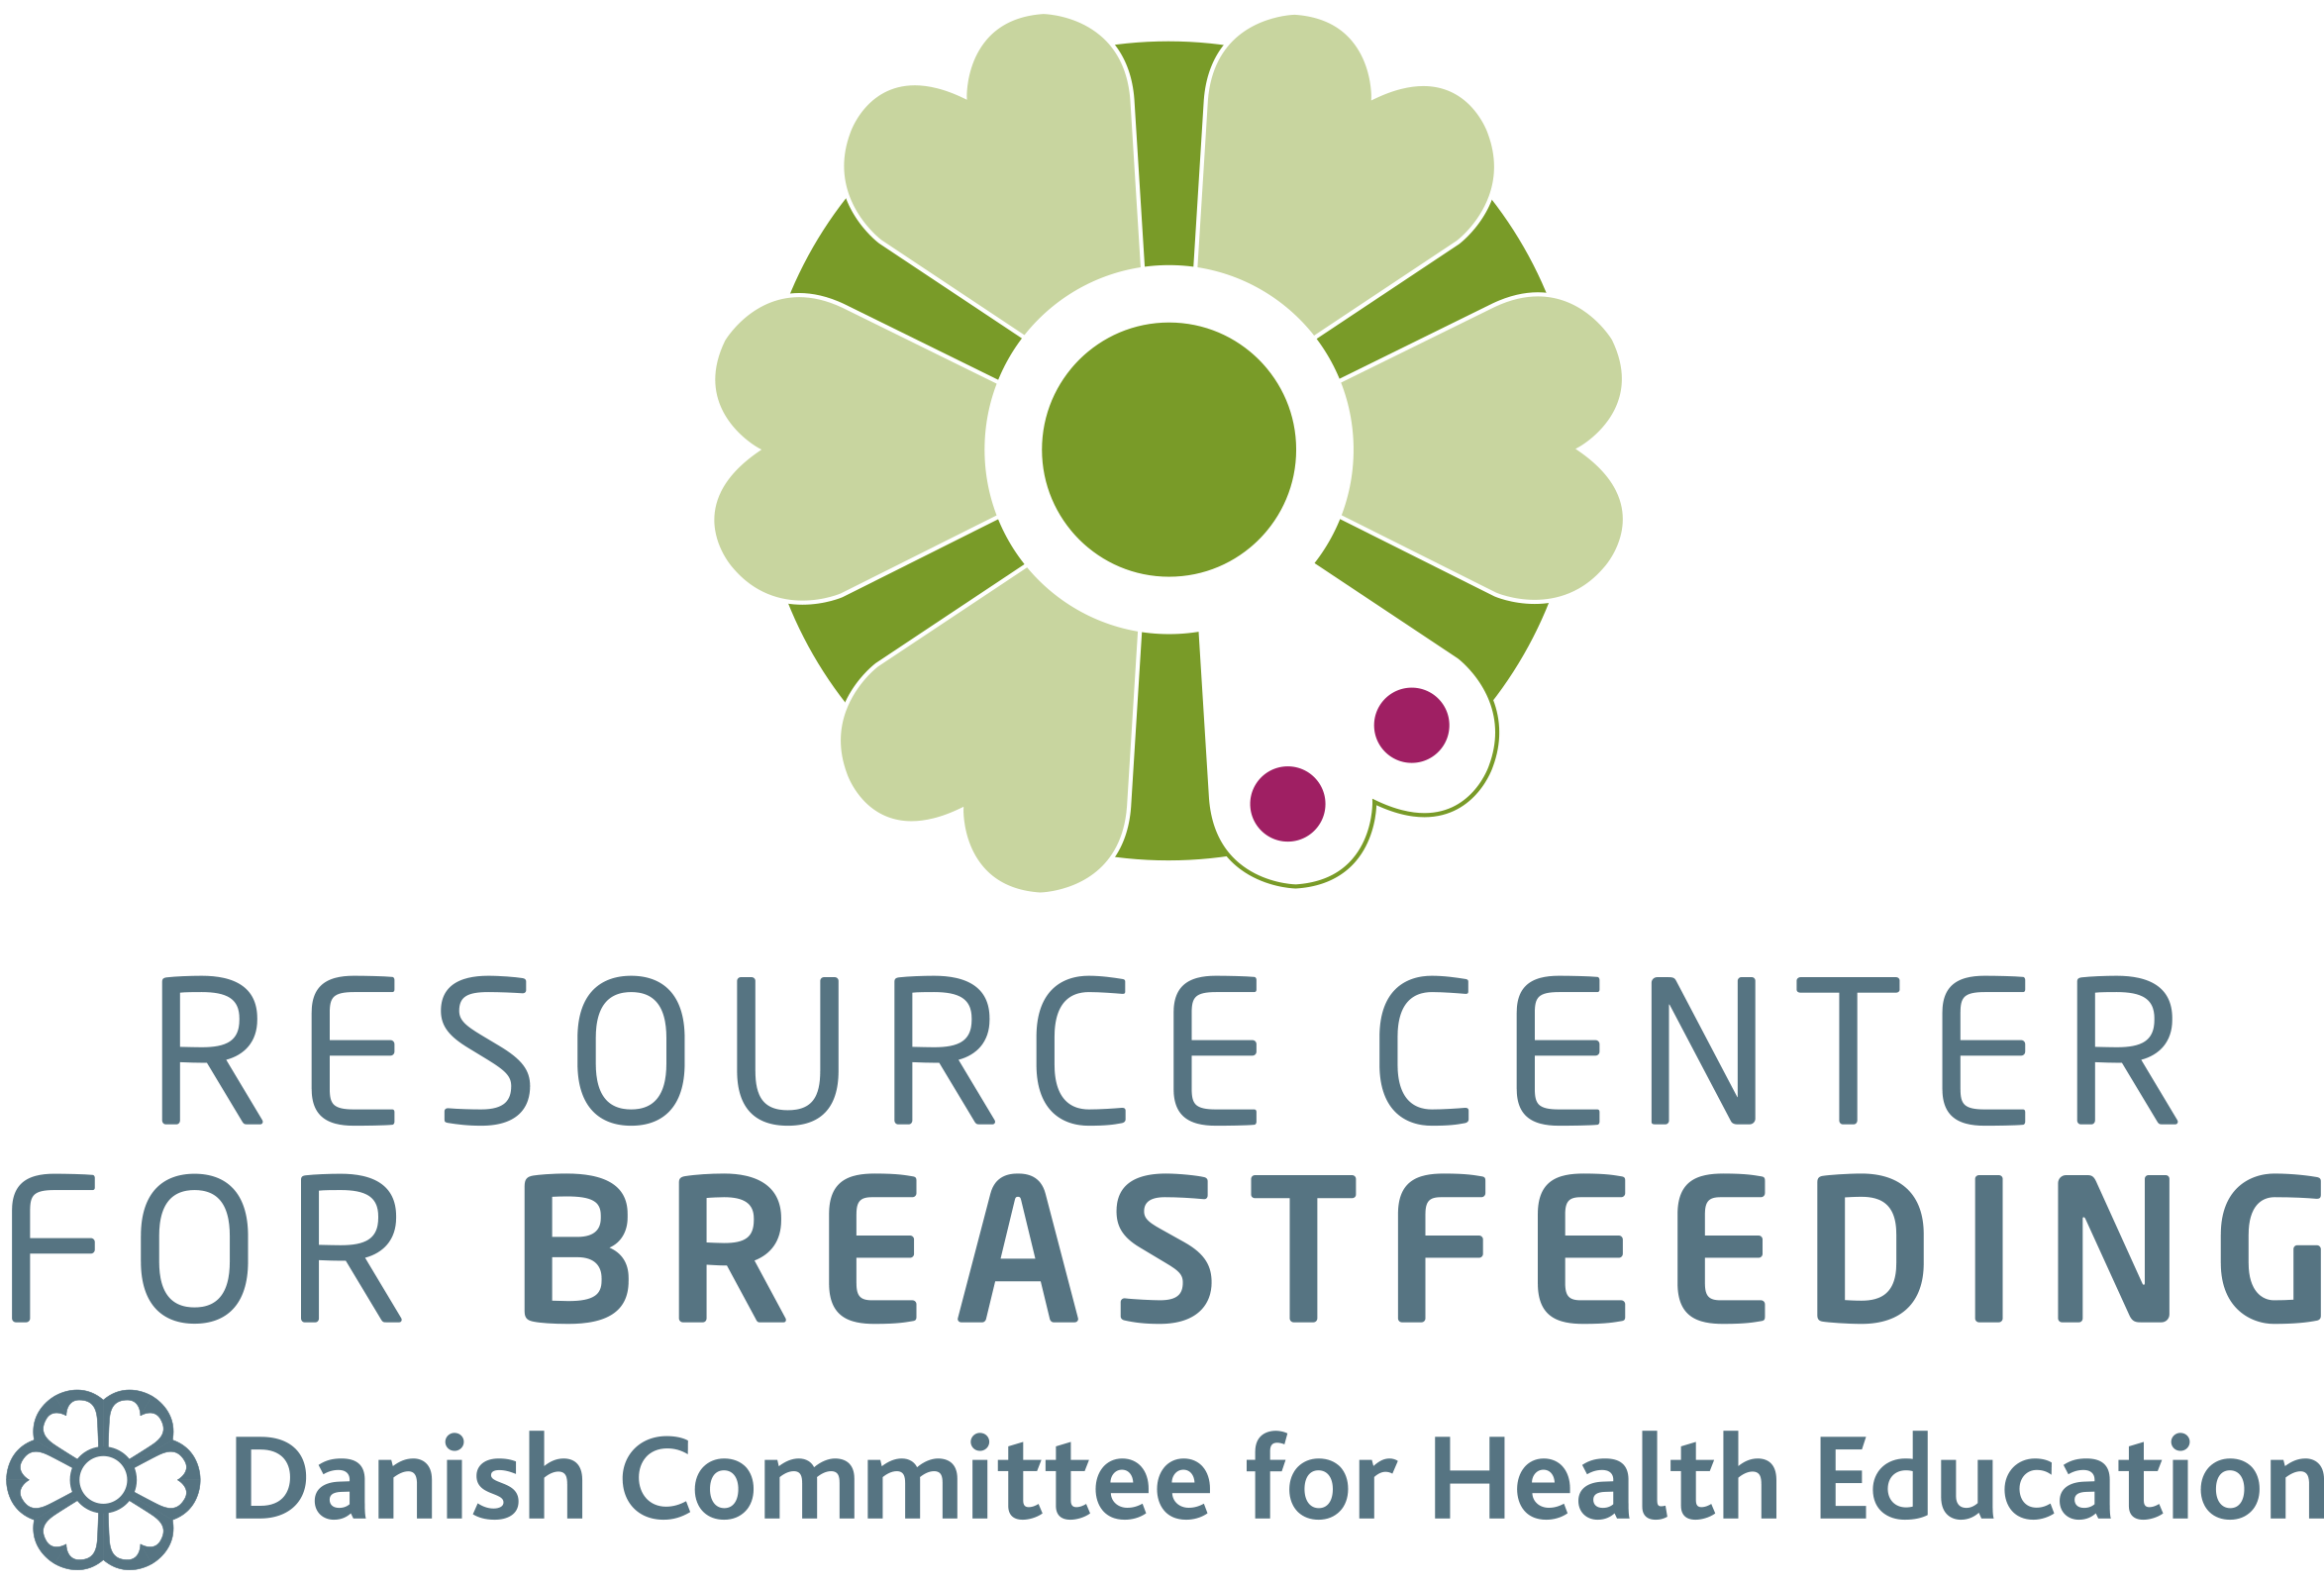 Logo for Resource center for breastfeeding and the Danish Comitee for Health Education